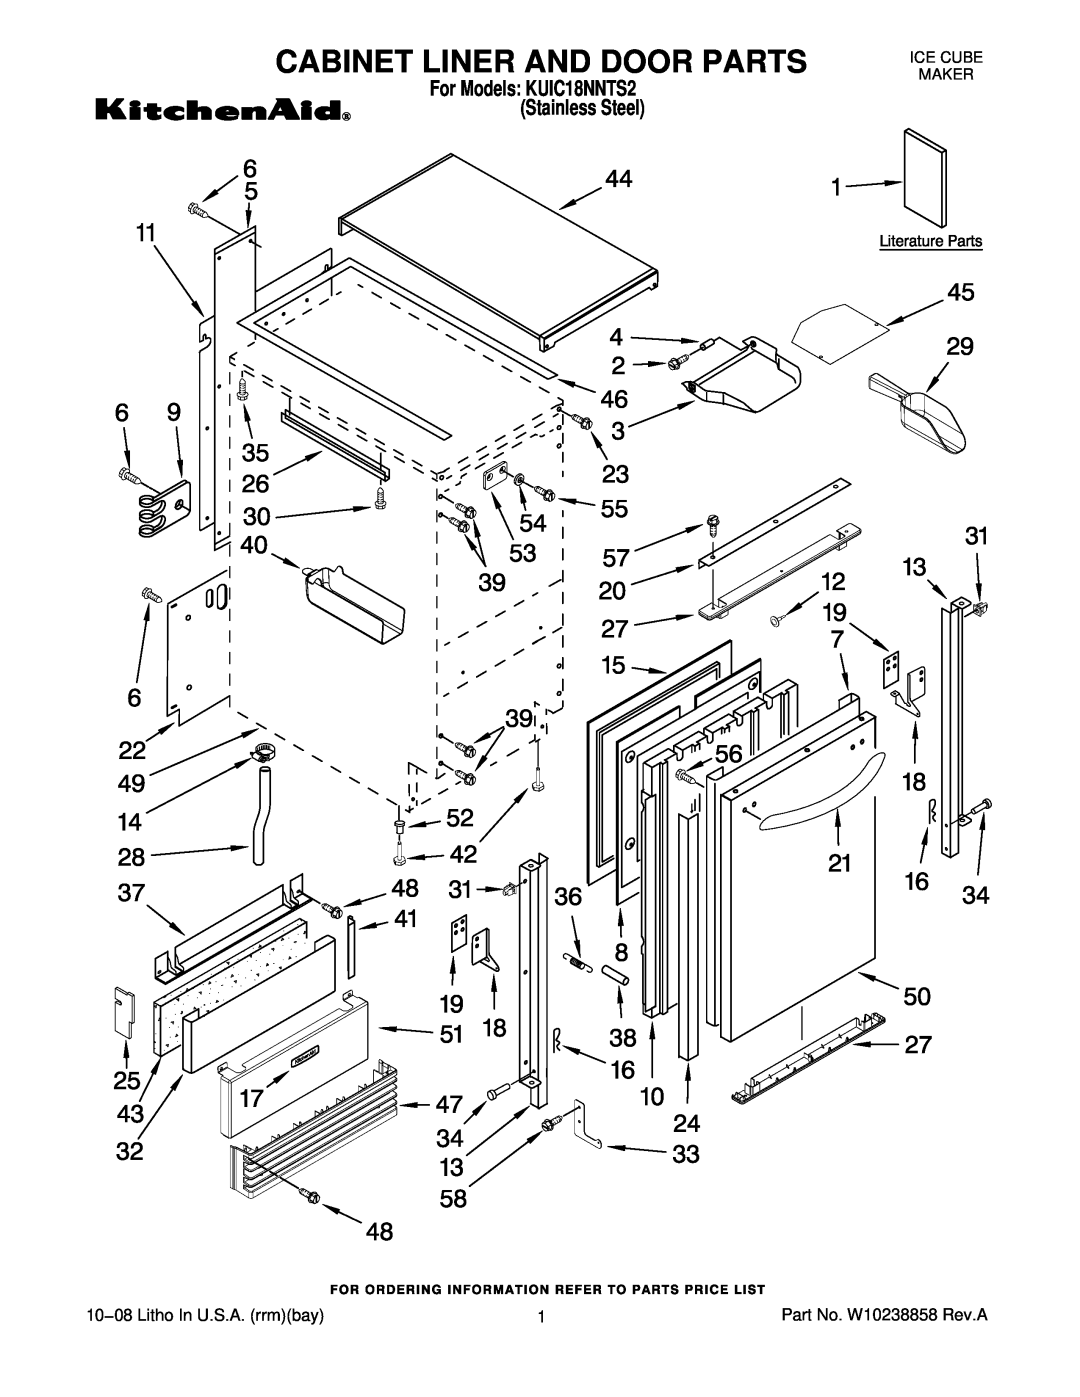 KitchenAid manual Cabinet Liner And Door Parts, For Models KUIC18NNTS2 Stainless Steel, Ice Cube Maker 